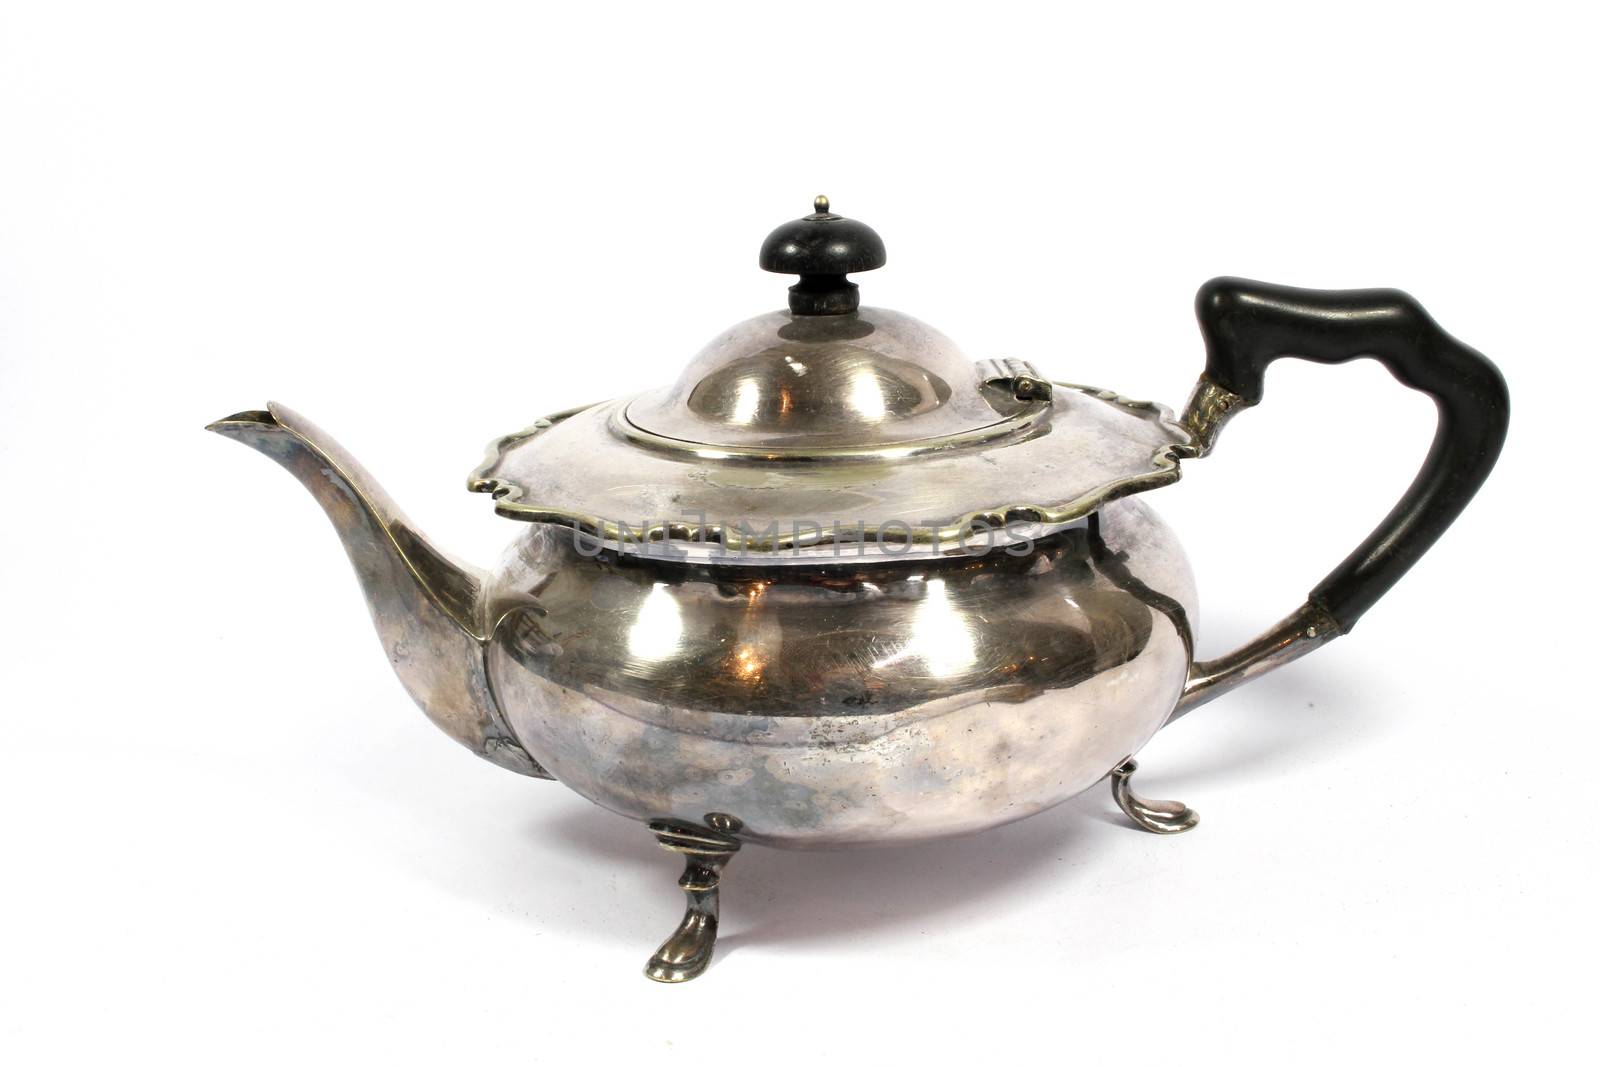 A Vintage Antique Kettle or Tea Pot In Metal on White Background